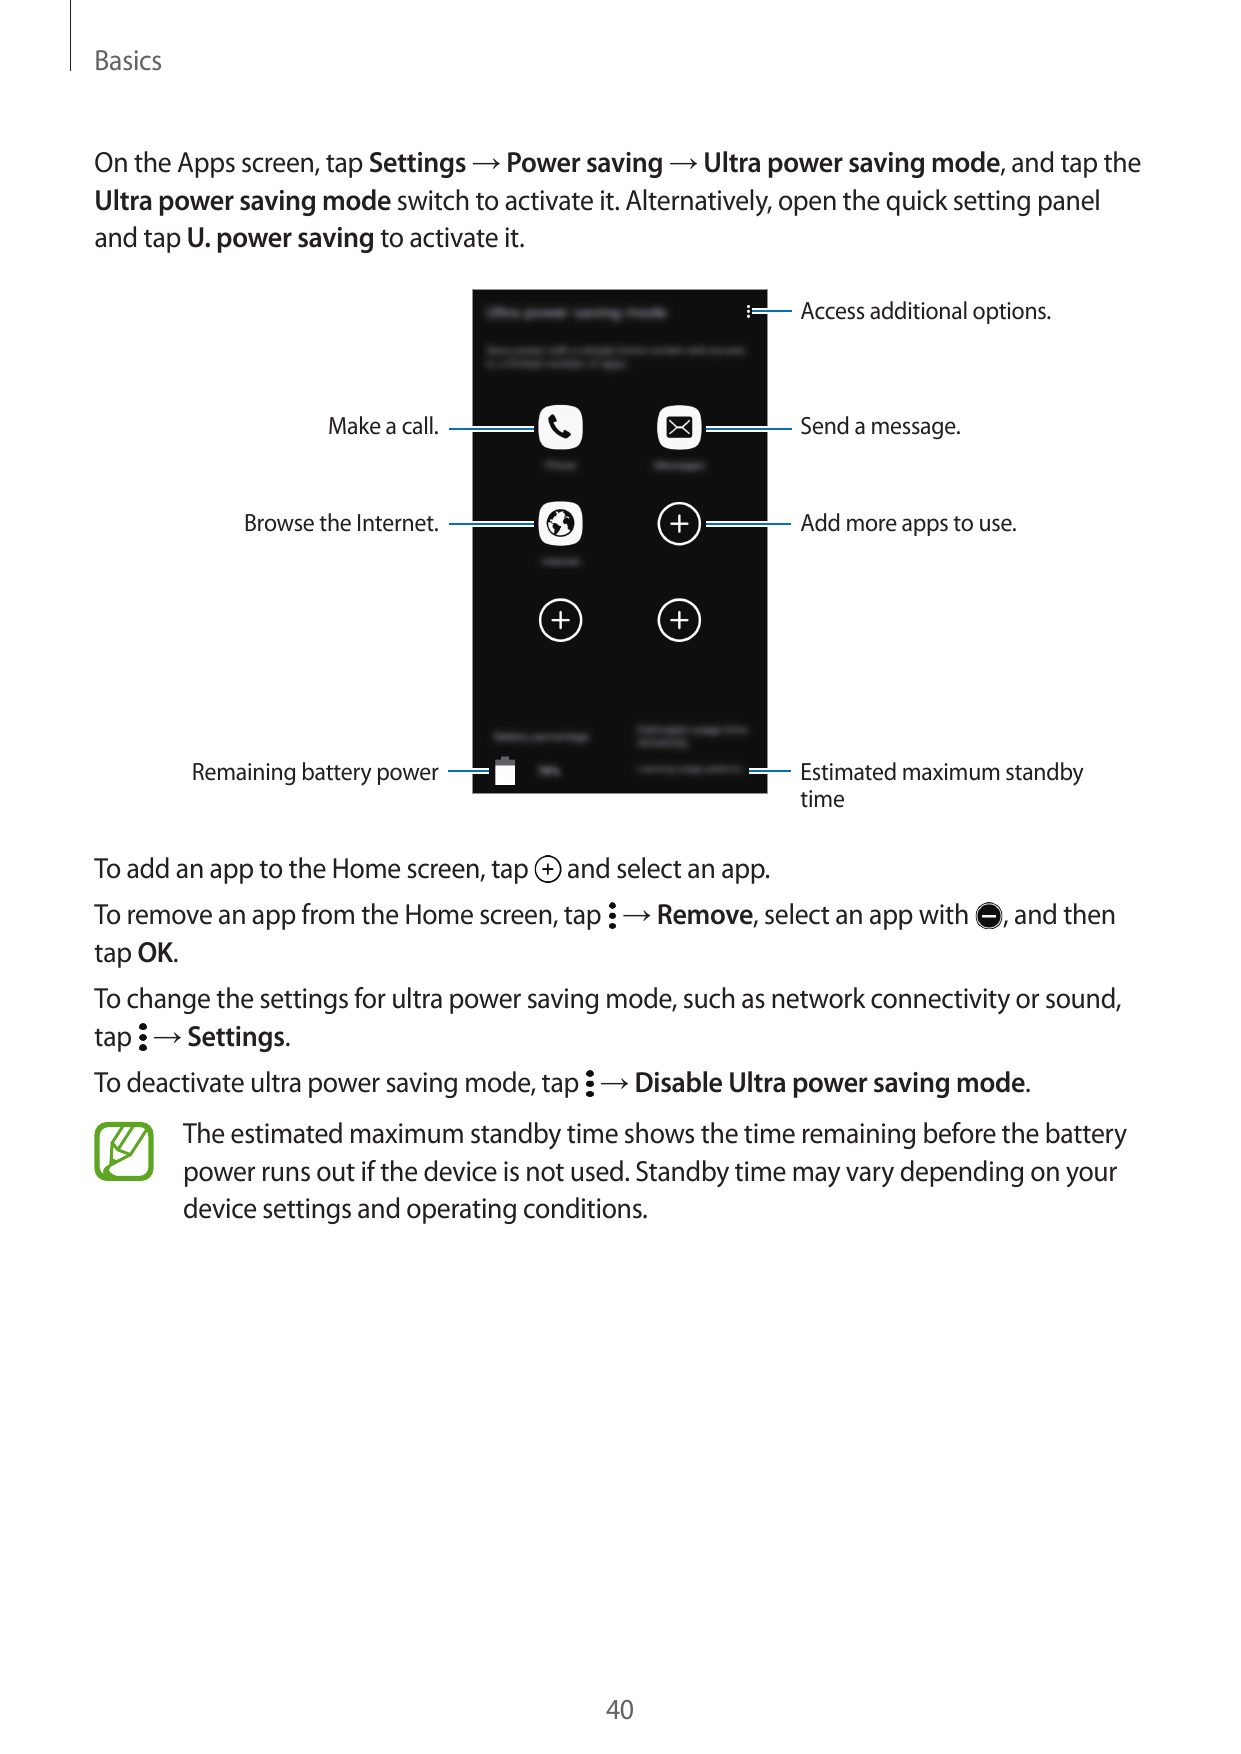 BasicsOn the Apps screen, tap Settings → Power saving → Ultra power saving mode, and tap theUltra power saving mode switch to ac